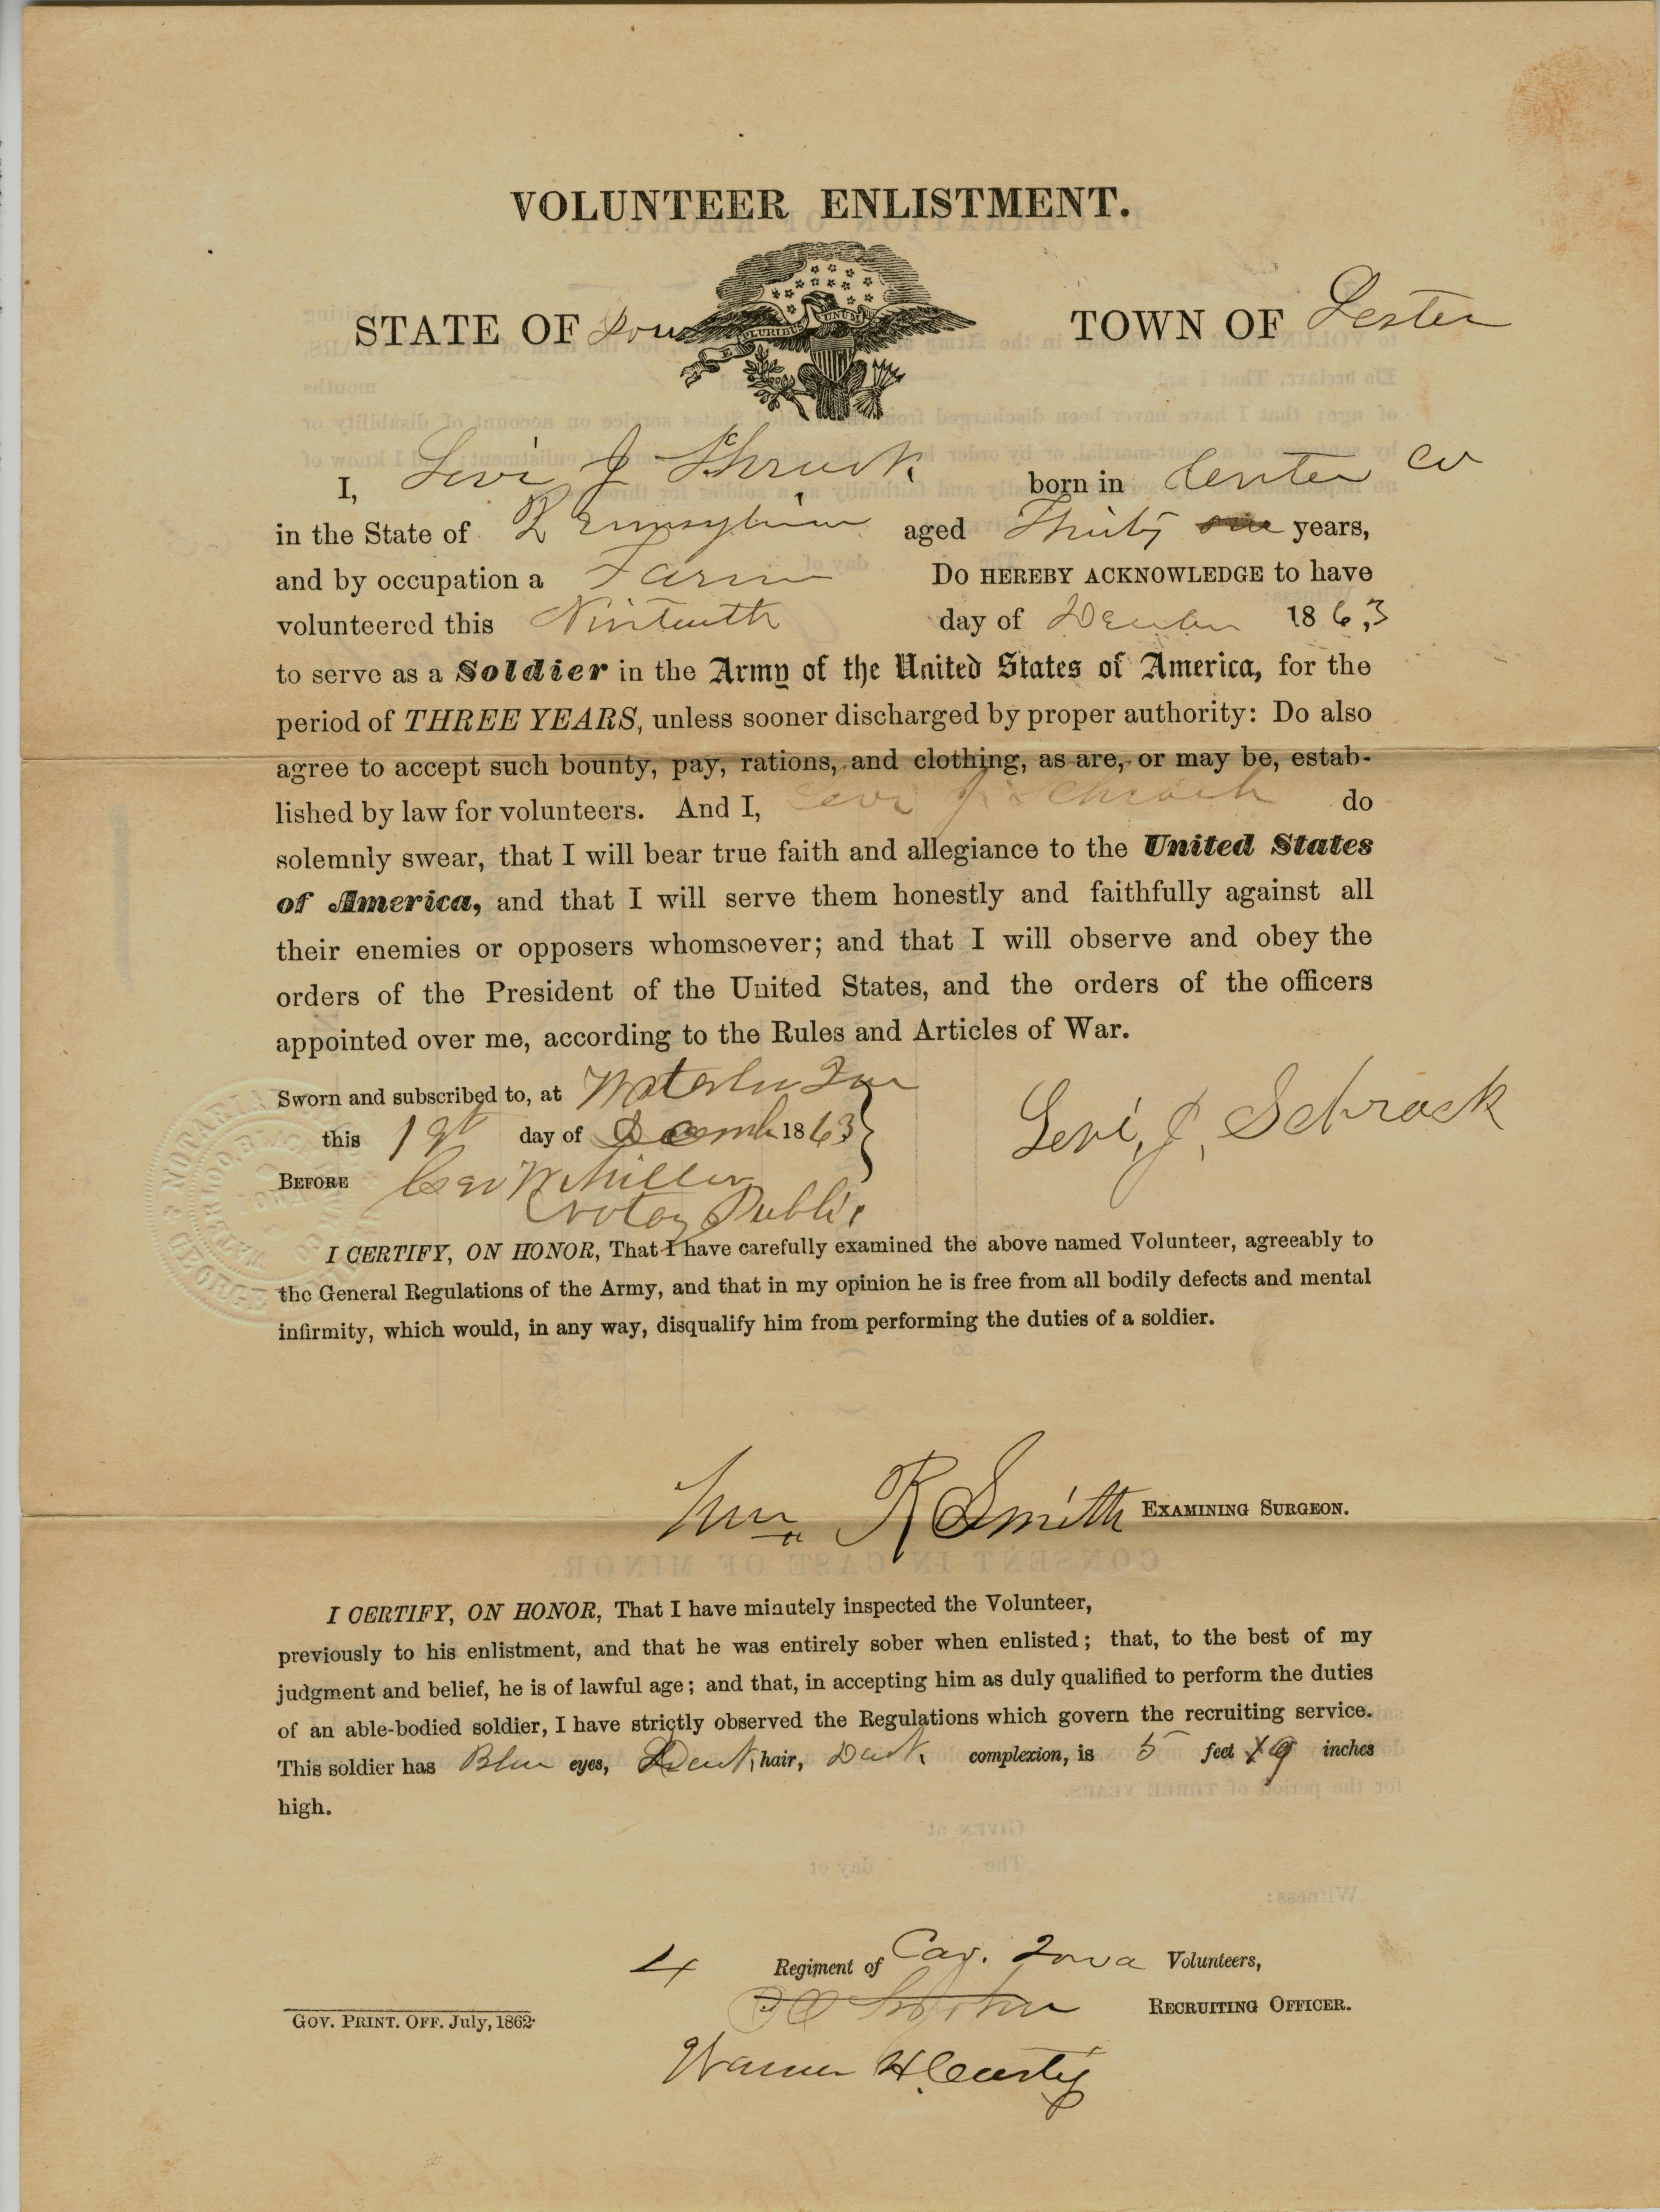 Image of a recruit's volunteer enlistment form, page 1